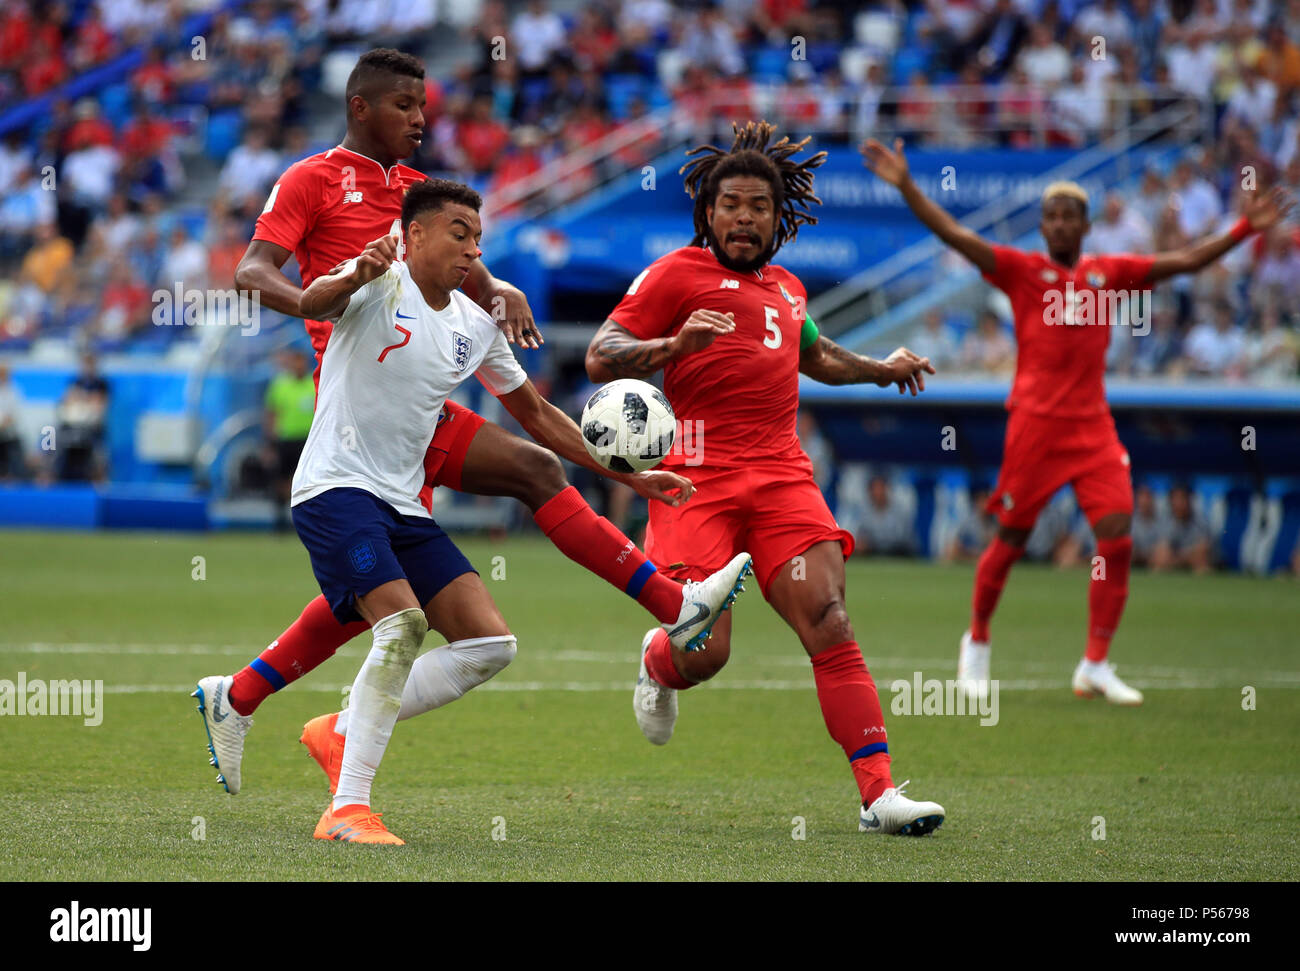 Panama's Fidel Escobar challenges England's Jesse Lingard for the ball and concedes a penalty during the FIFA World Cup Group G match at the Nizhny Novgorod Stadium Stock Photo